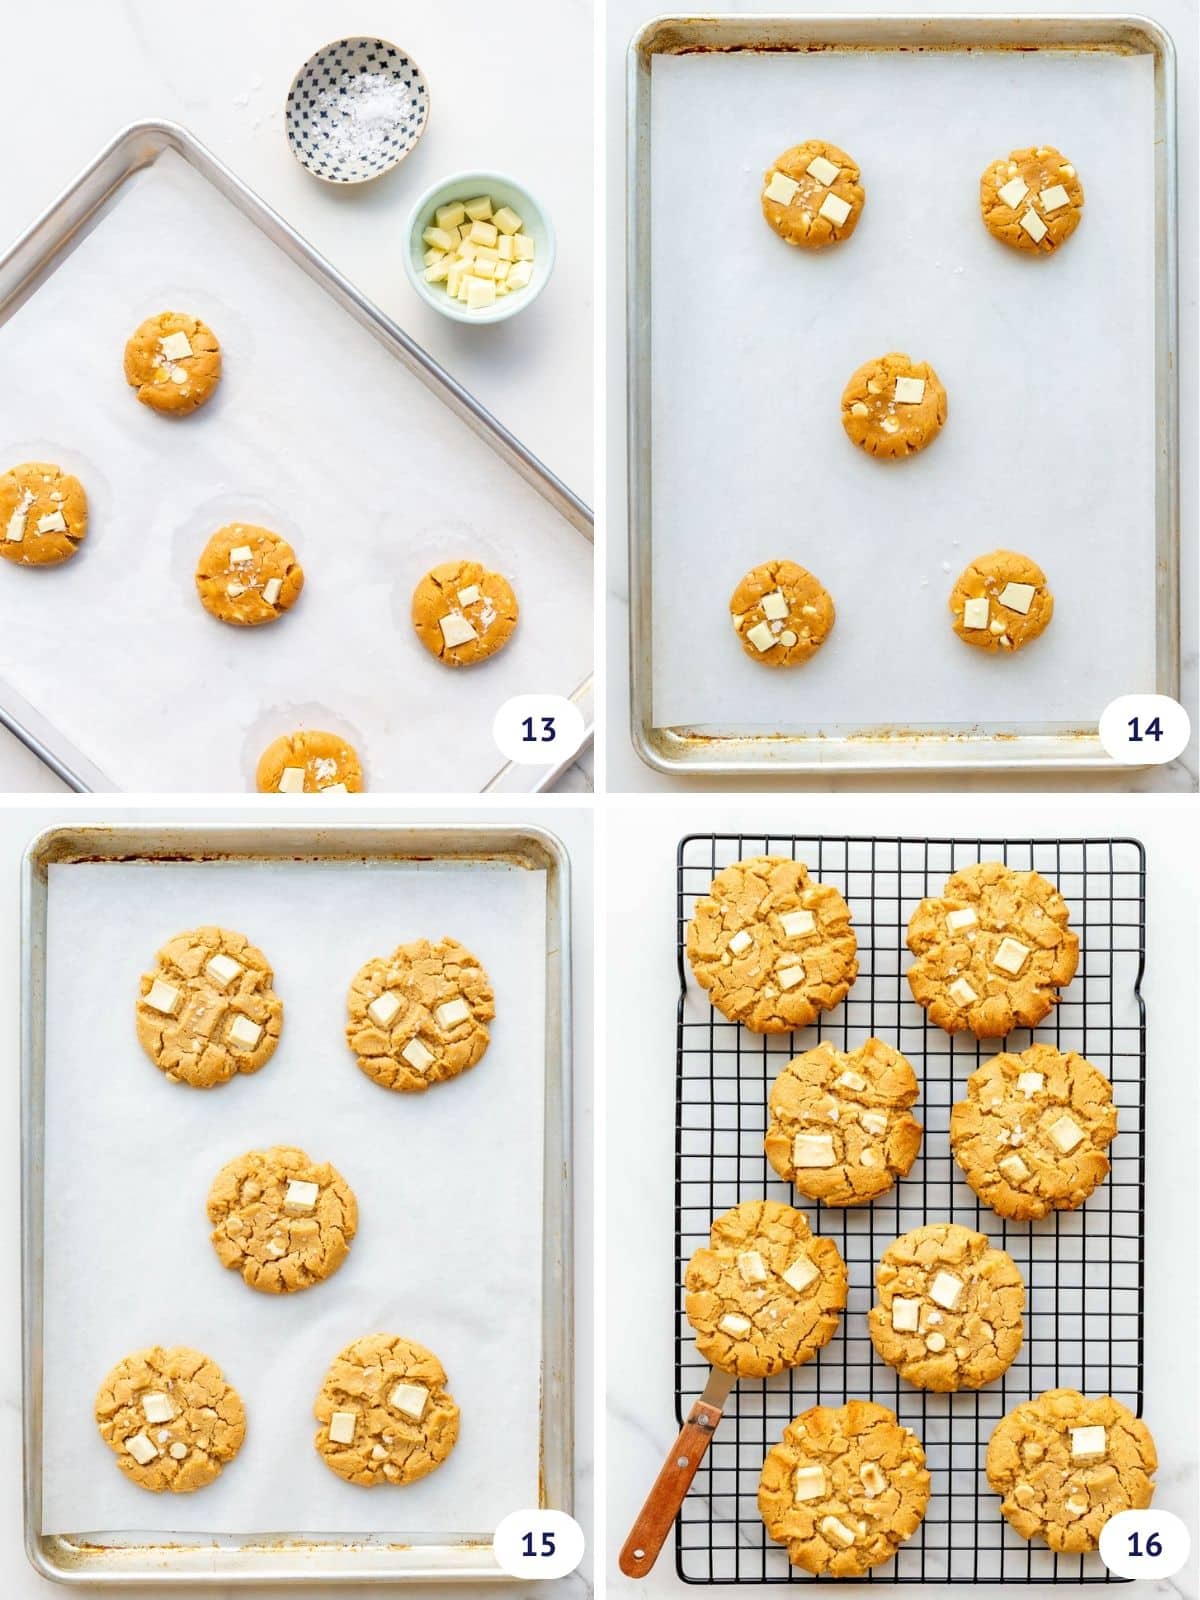 Collage to show garnishing unbaked peanut butter cookies with flaky sea salt and chunks of white chocolate before baking them and cooling them on a wire rack.